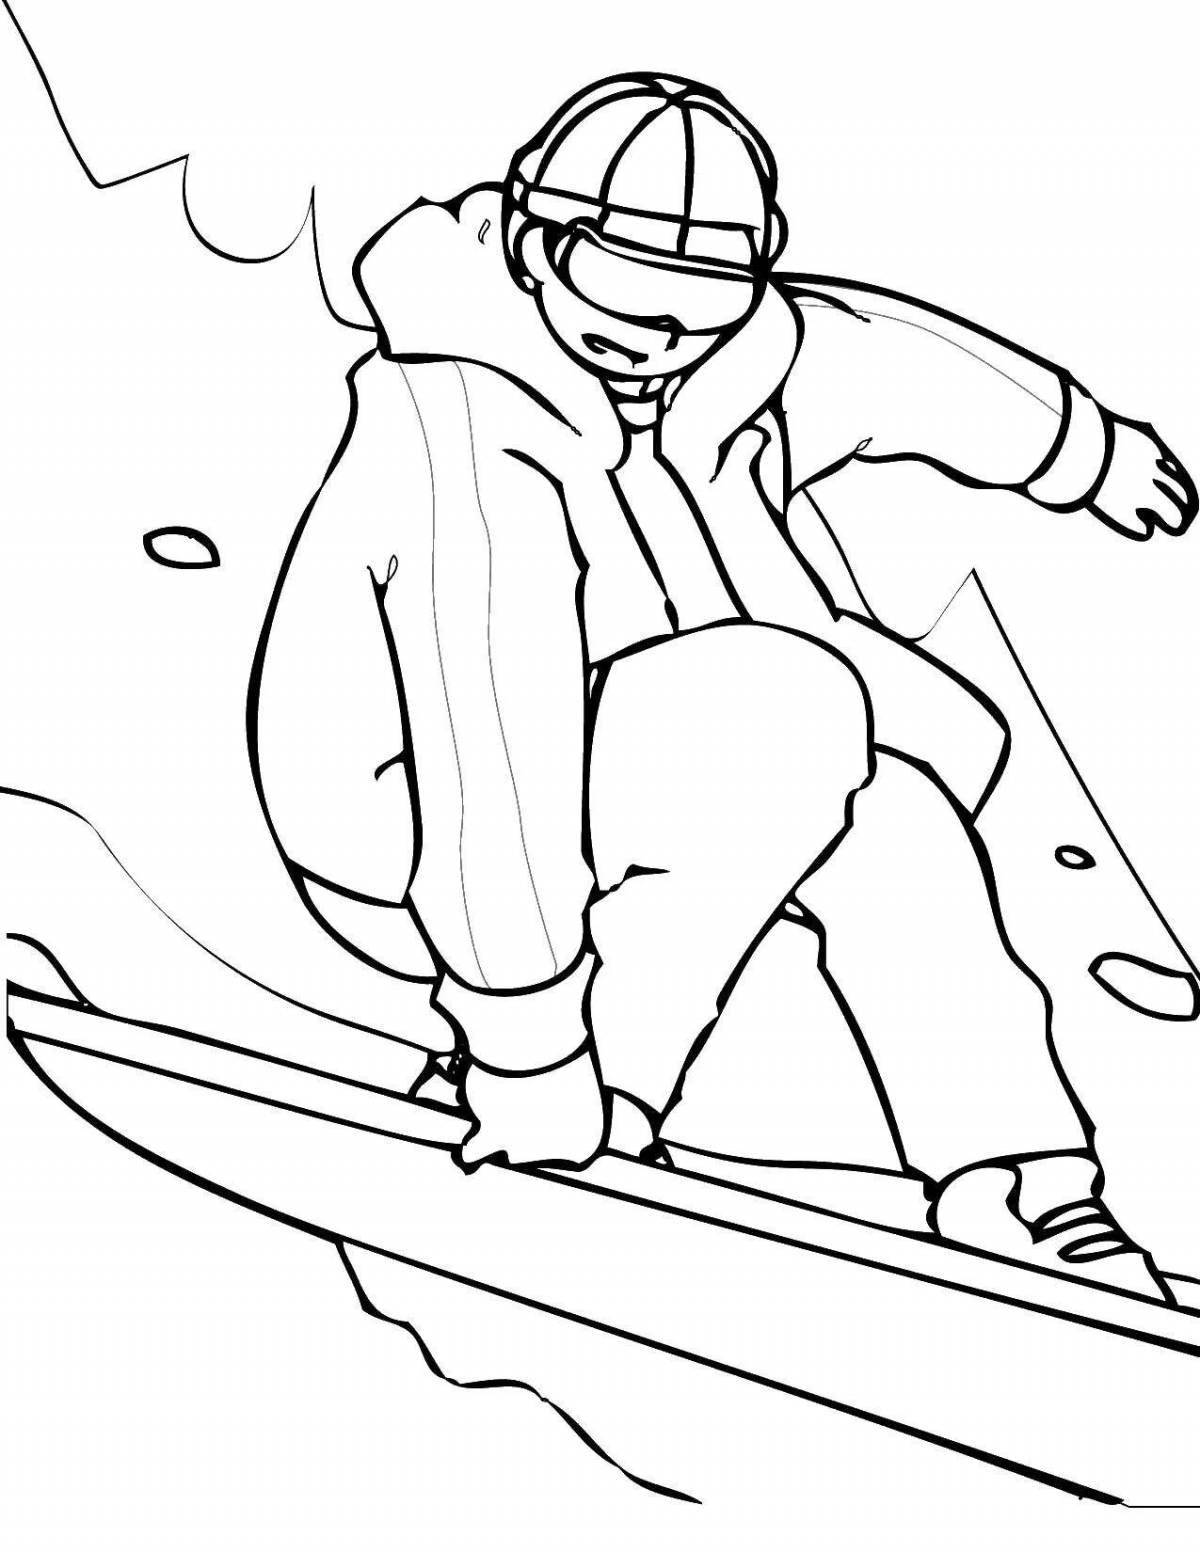 Great luge coloring book